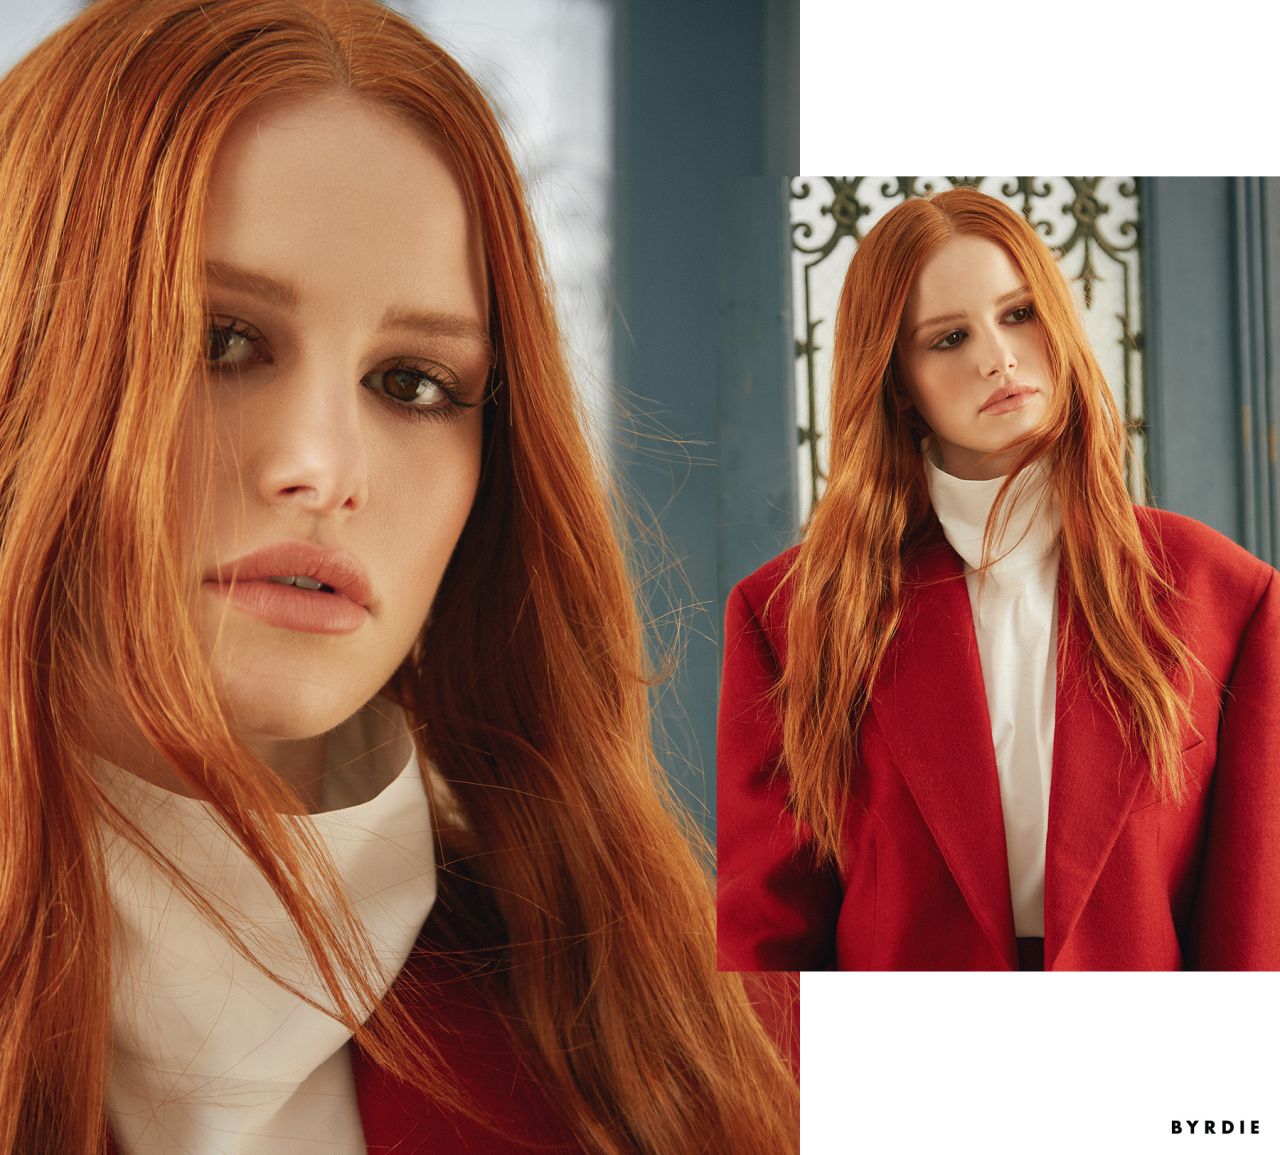 Madelaine Petsch - Byrdie Beauty Photoshoot.